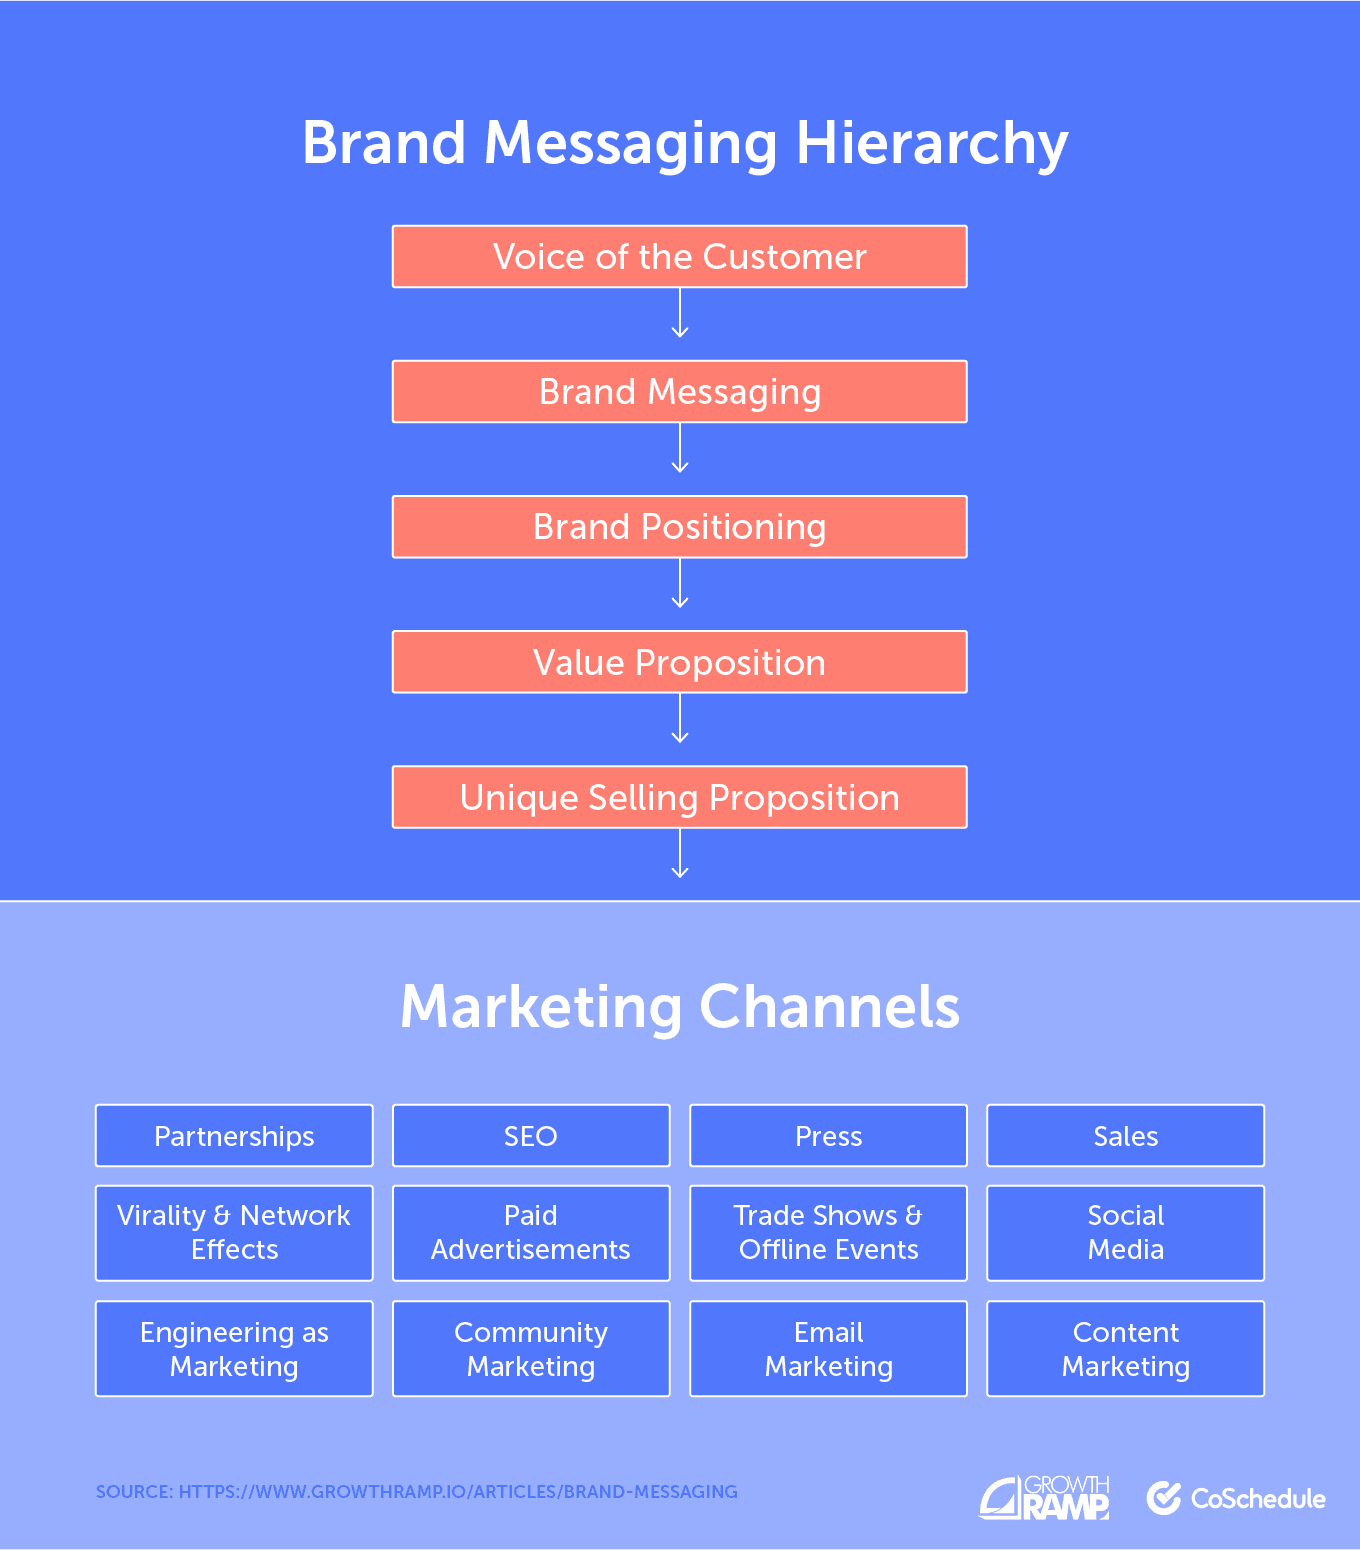 Map of the brand messaging hierarchy and channels